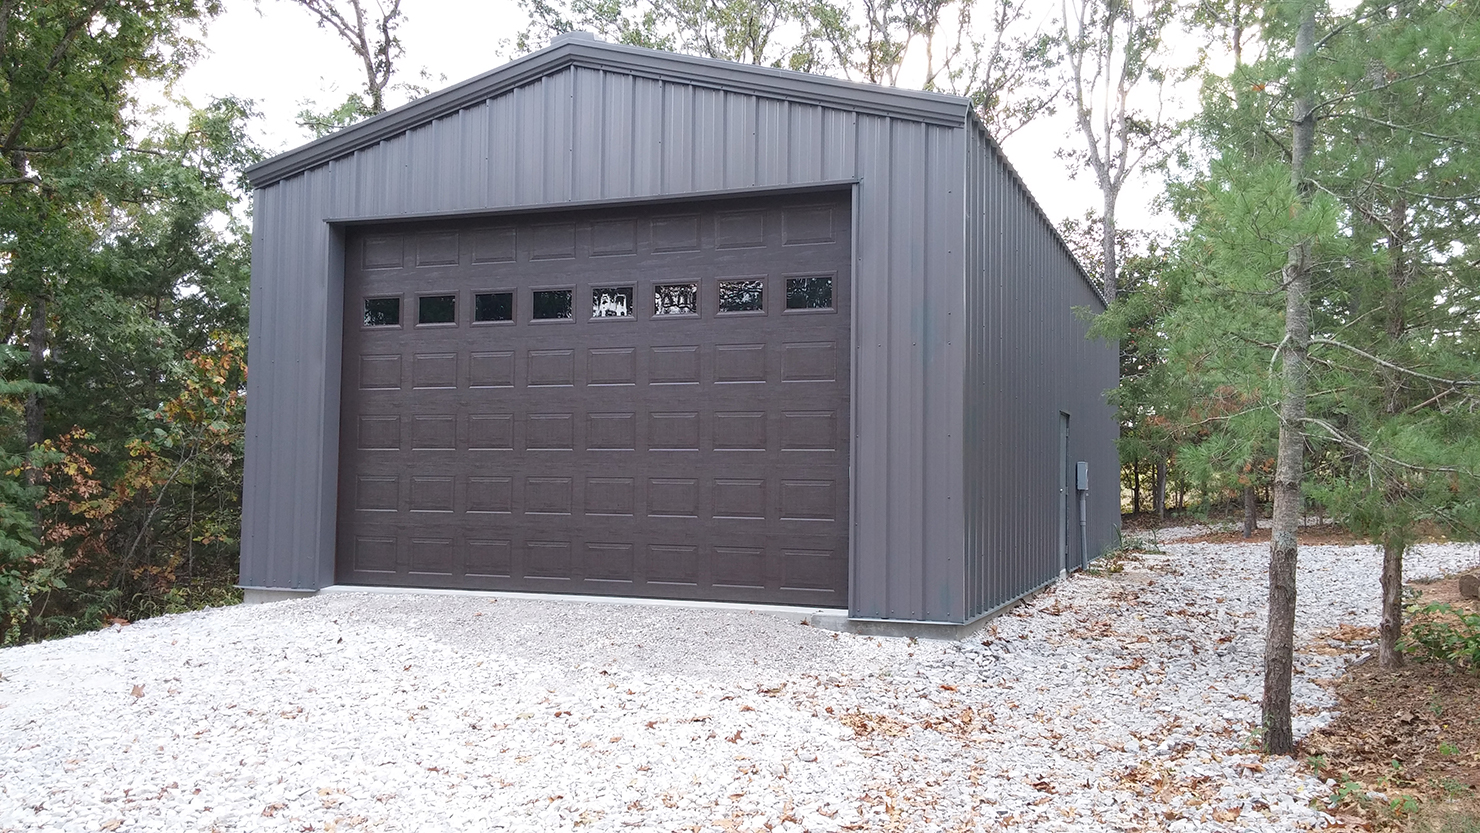 Garages the Best Way to Improve Home Value